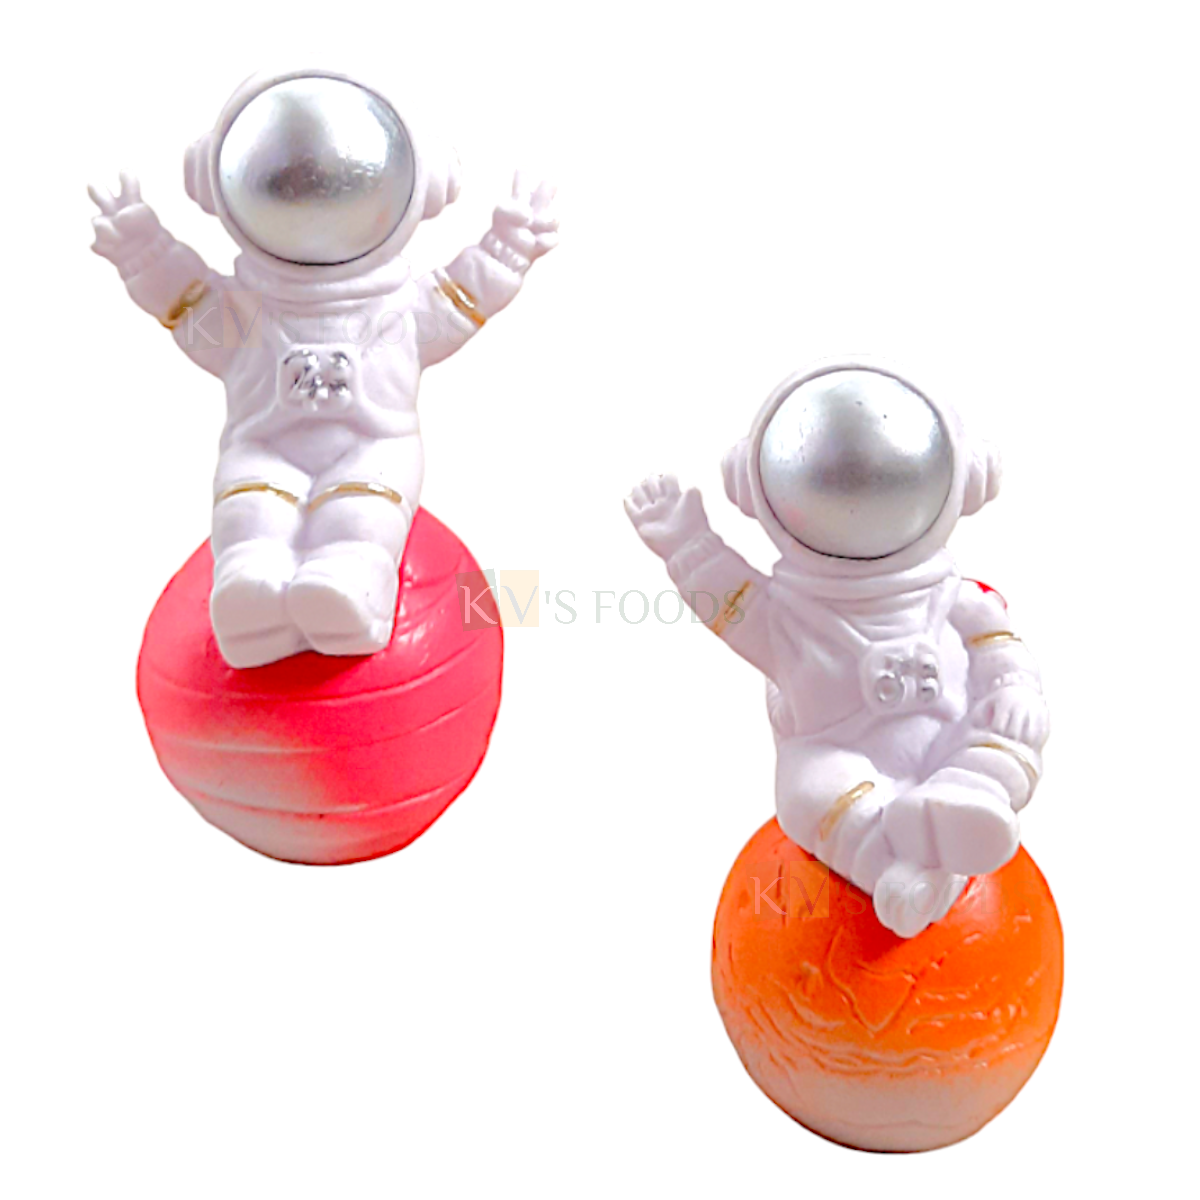 1PC Sitting Astronaut Spaceman Action Figurine on Earth Globe Cake Topper, Galaxy Space Boys Happy Birthday Theme Cake Decoration, Miniature Figurine, Figure for Shelf Bookstore Office Car Dashboard